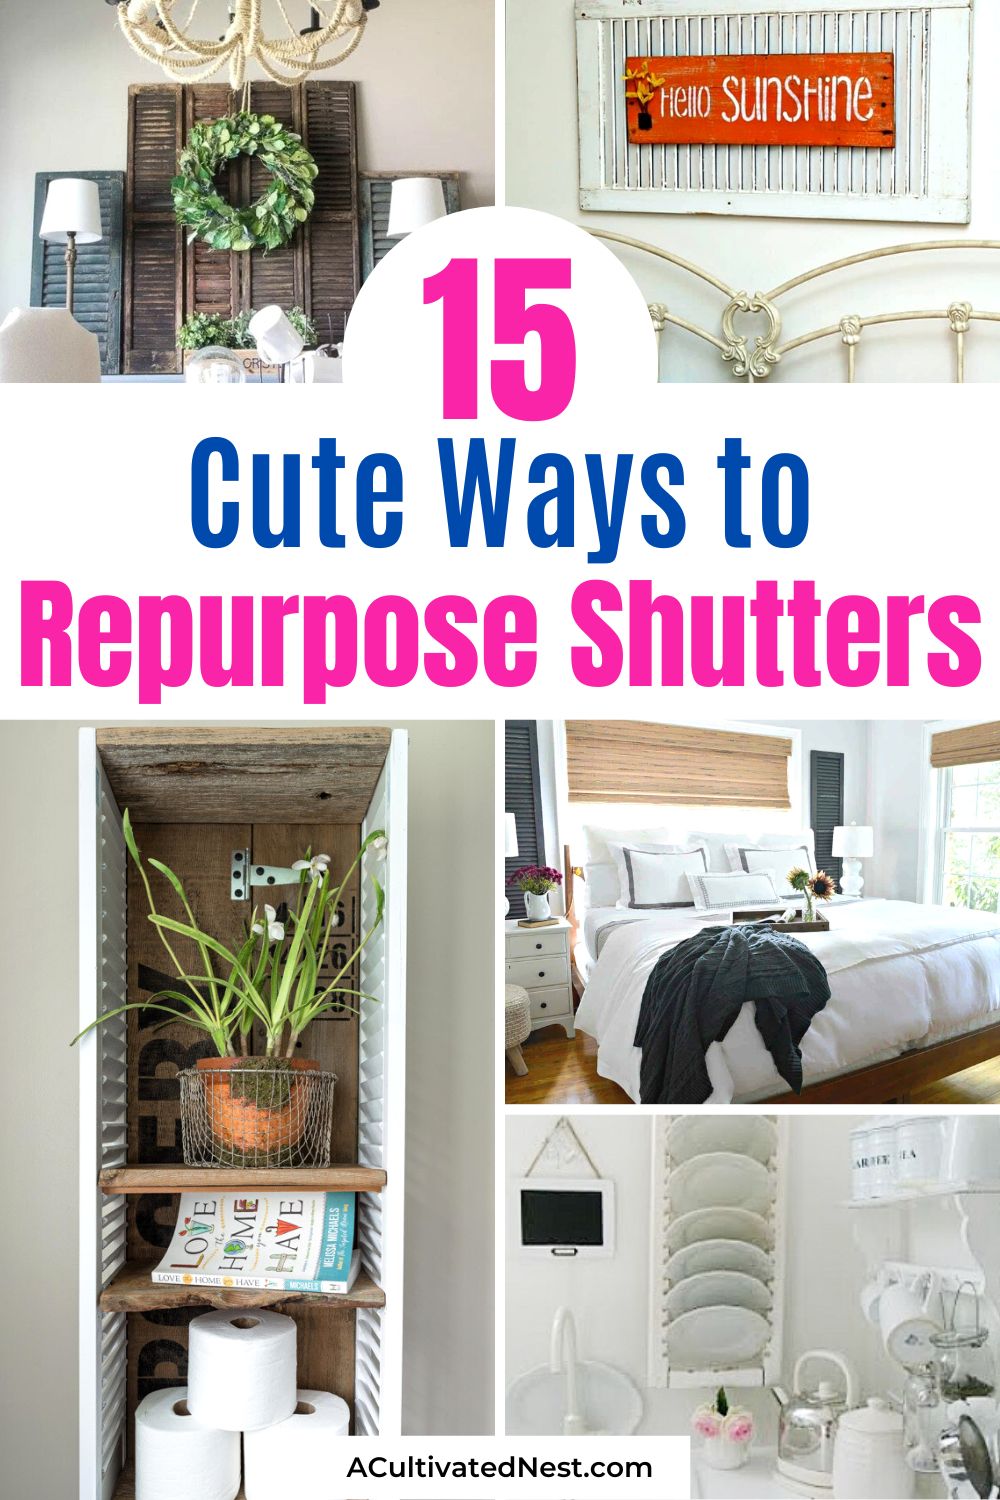 15 Awesome Ways To Repurpose Old Shutters- If you have old shutters left over from a renovation, don't throw them out! Instead, put them to new use with these cute ways to repurpose shutters! | what to do with leftover shutters, #upcycling #repurpose #diyProject #DIYs #ACultivatedNest